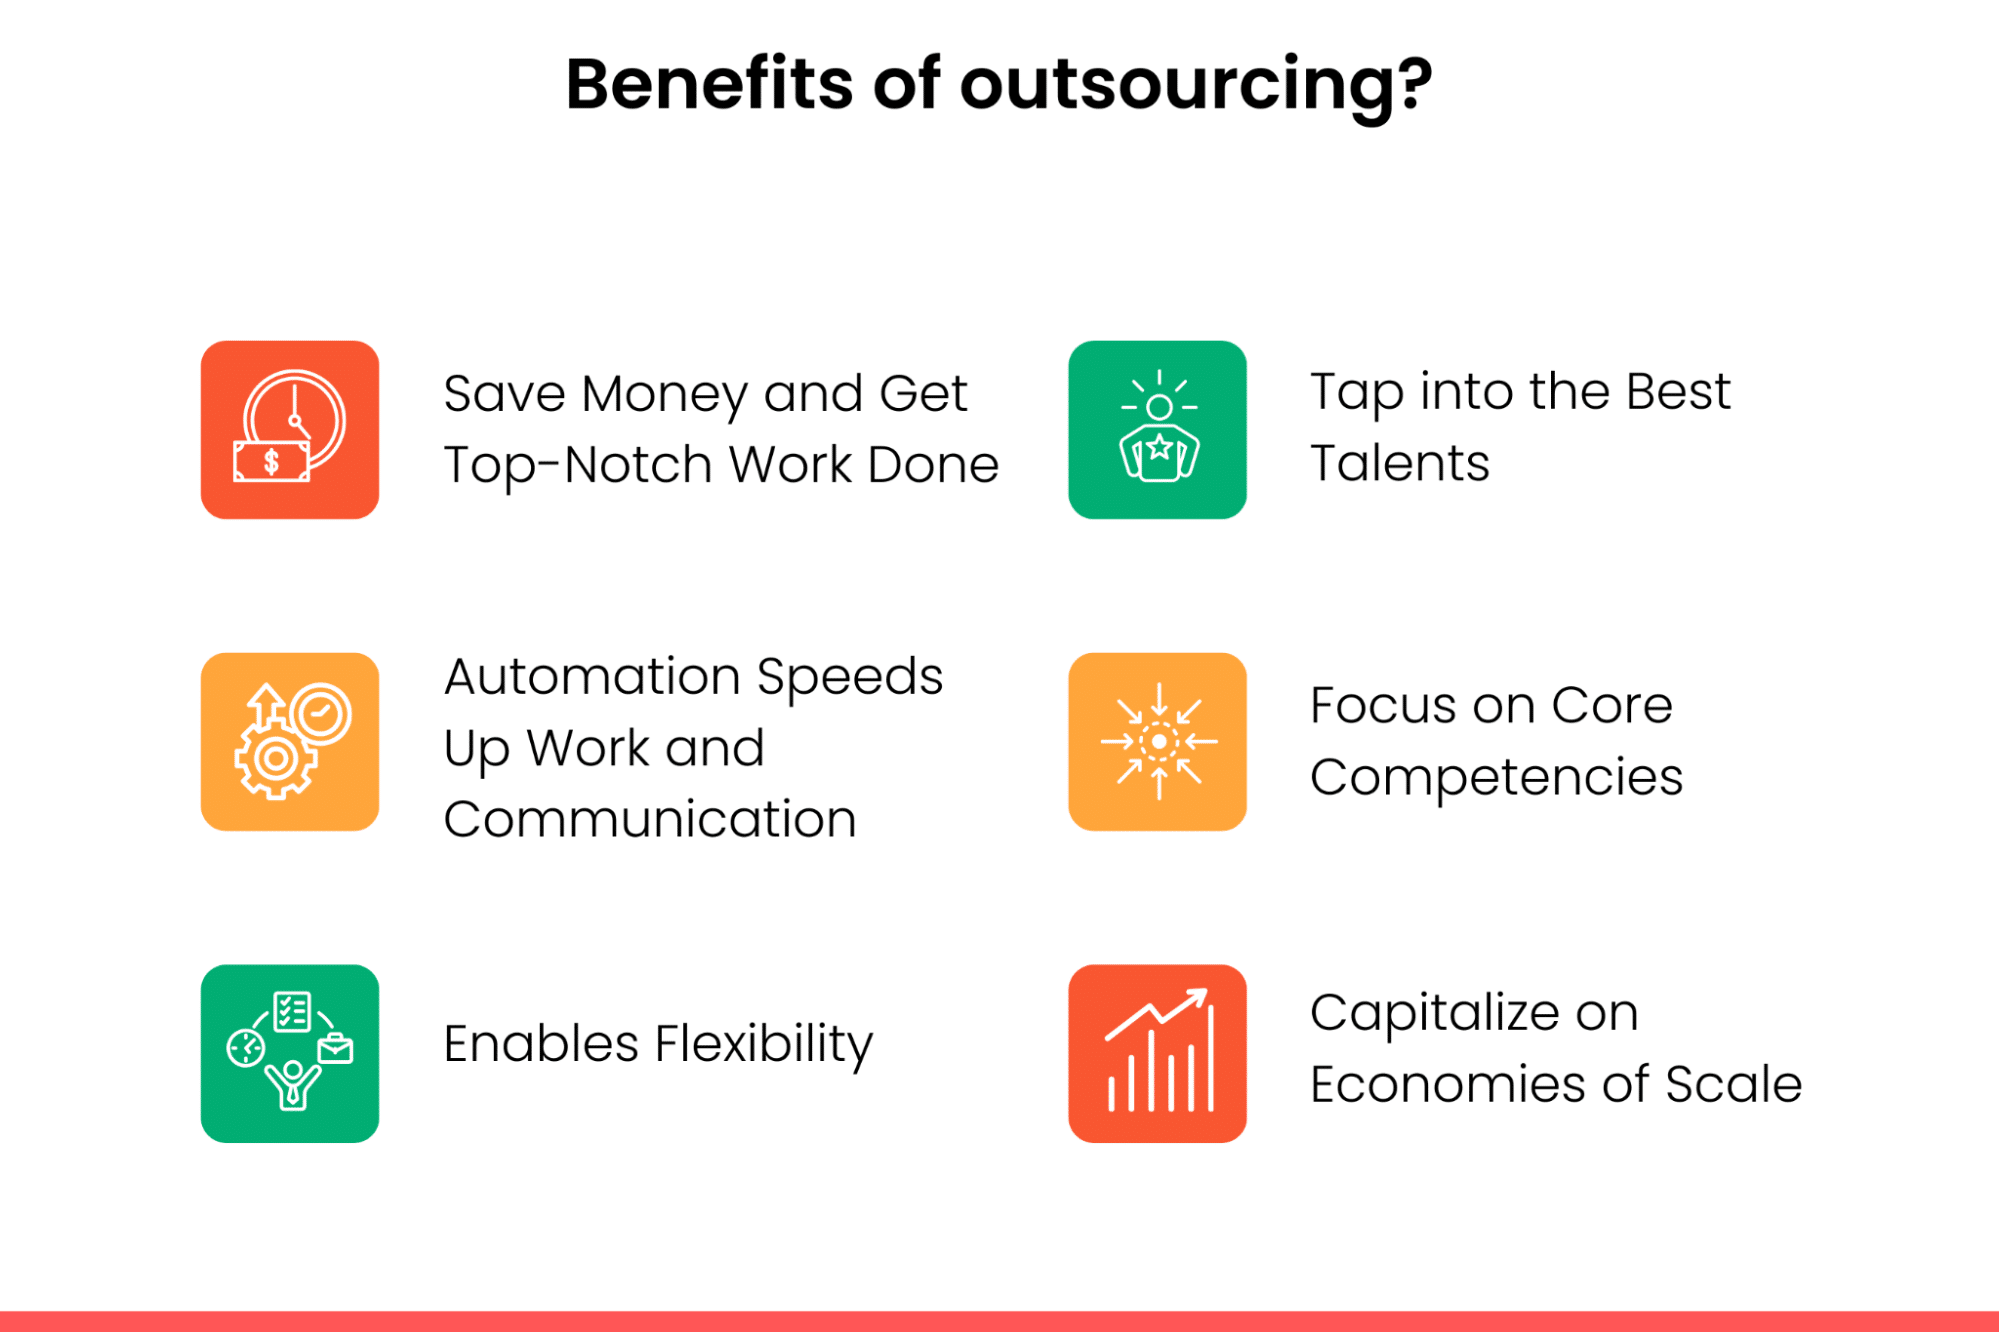 What are the key benefits of outsourcing